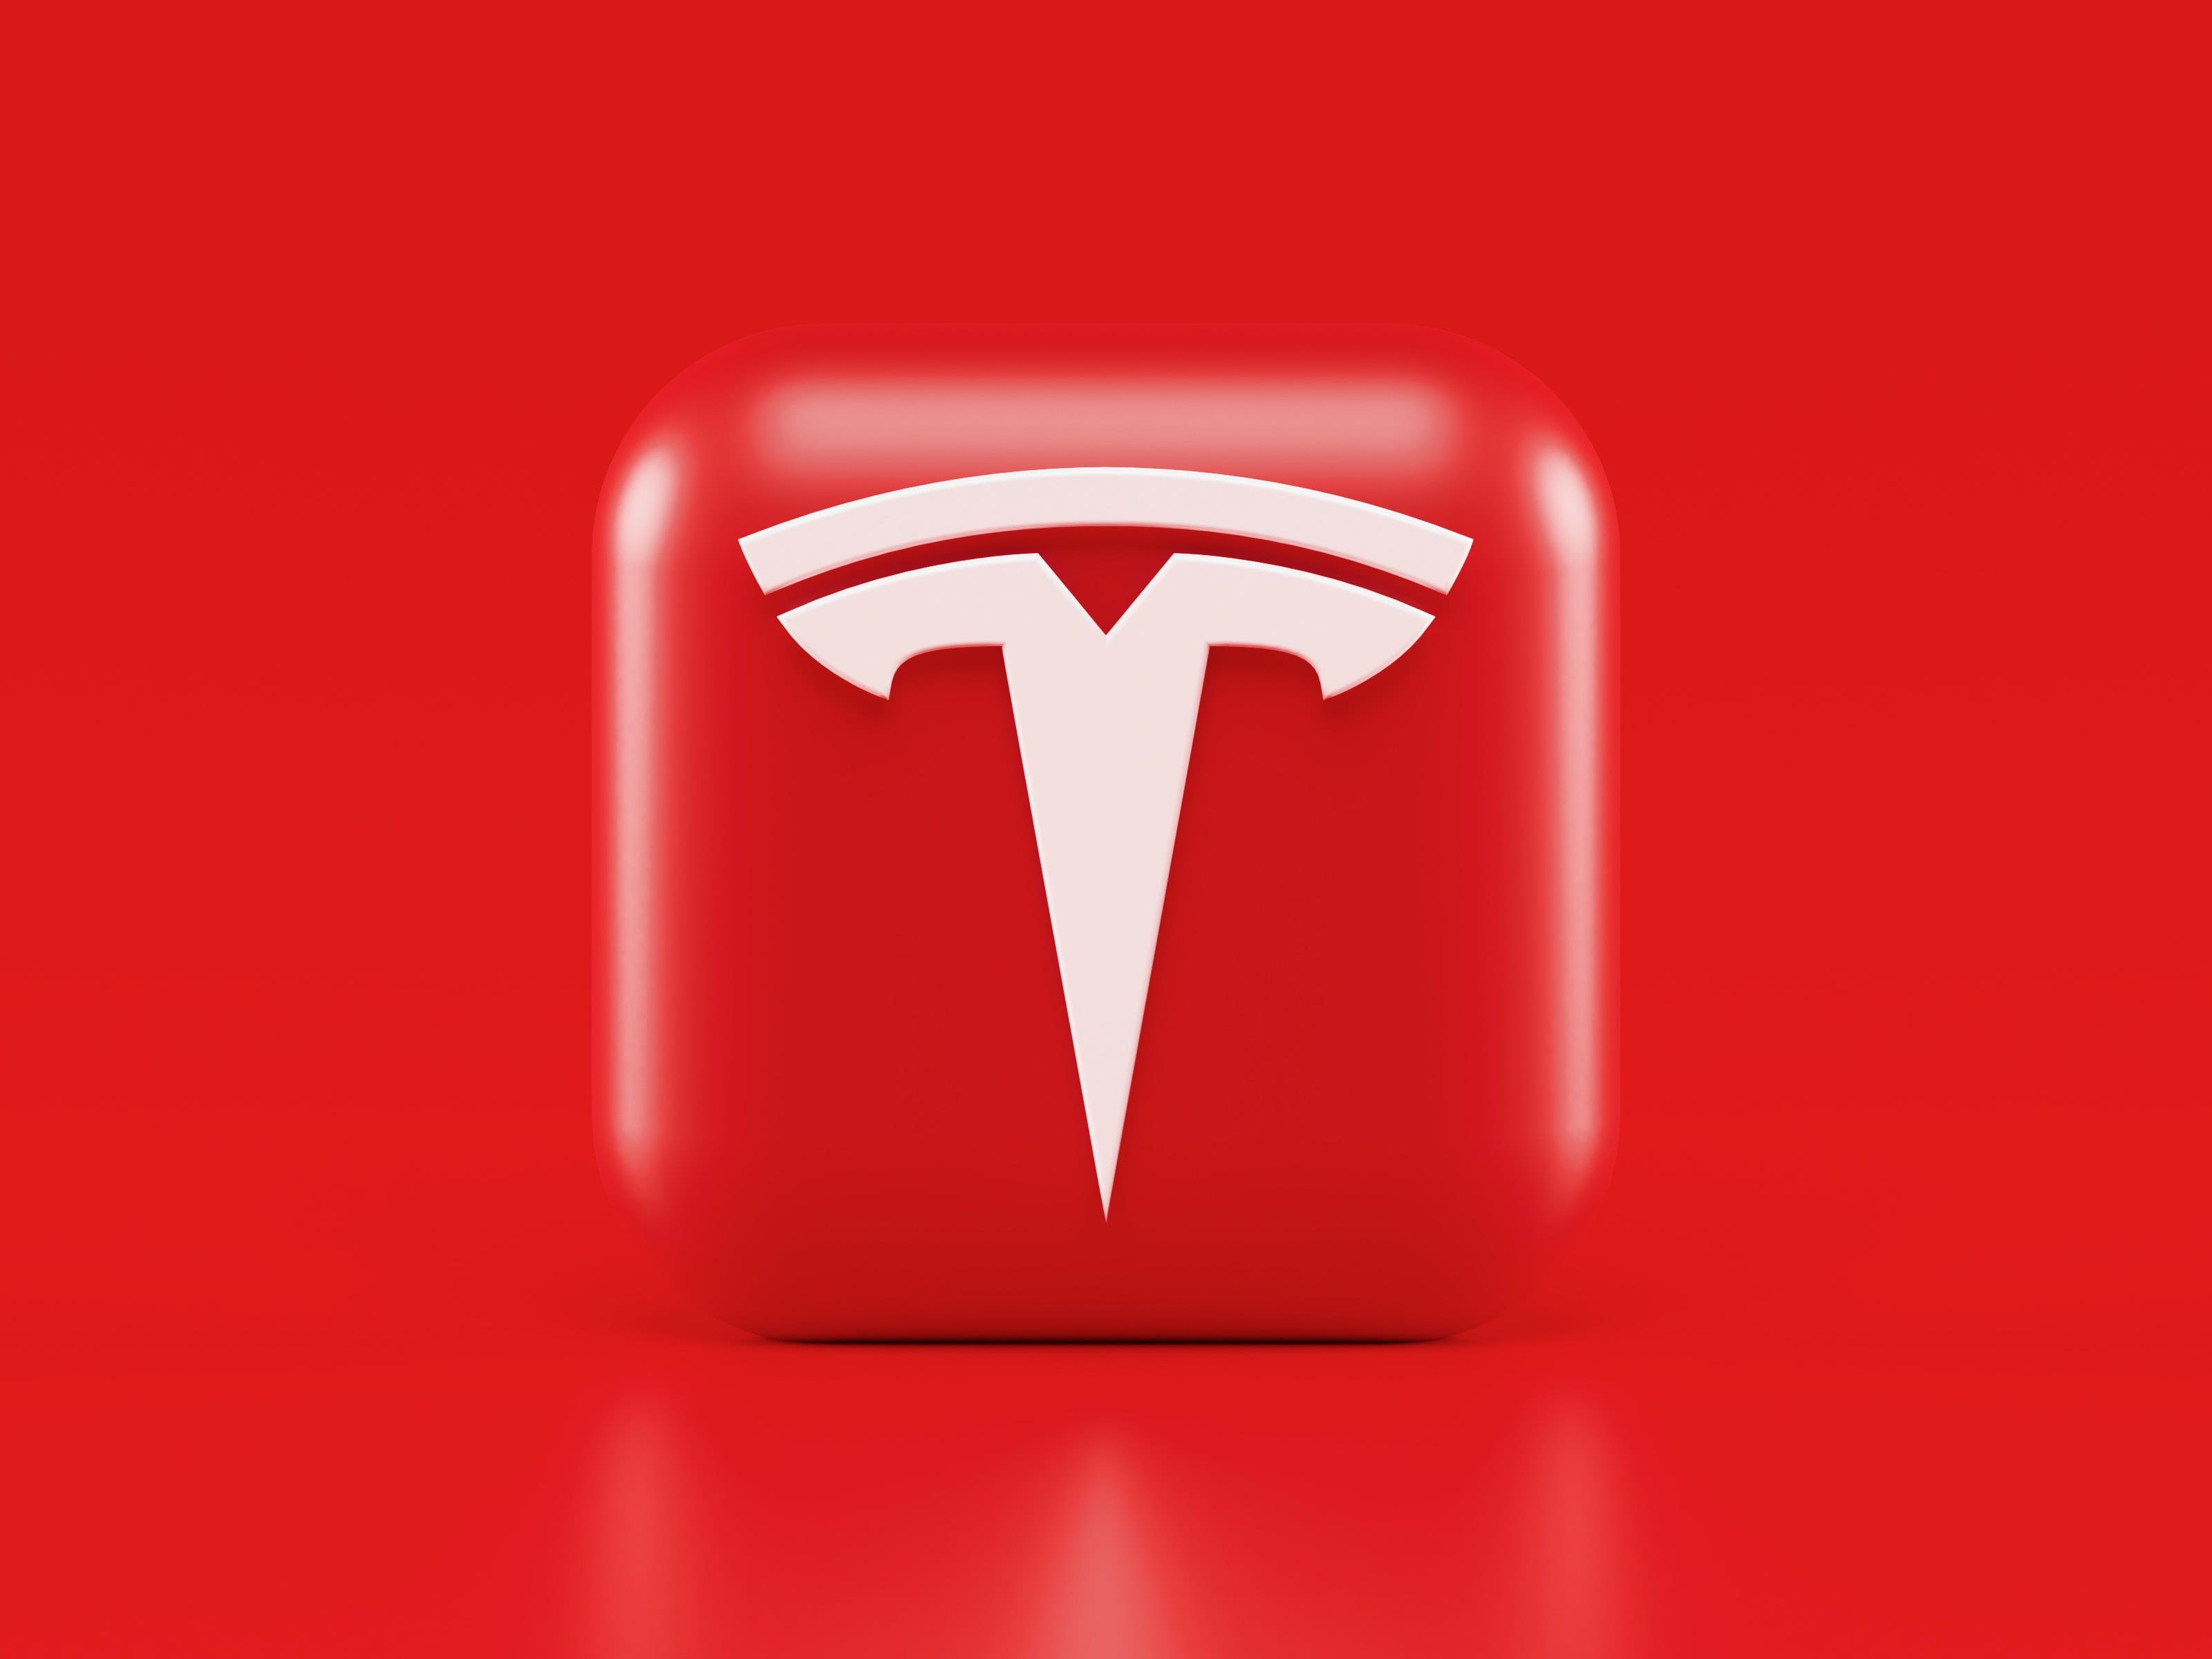 Tesla Ordered To Pay $137M To Former Black Employee Over Racism At Work